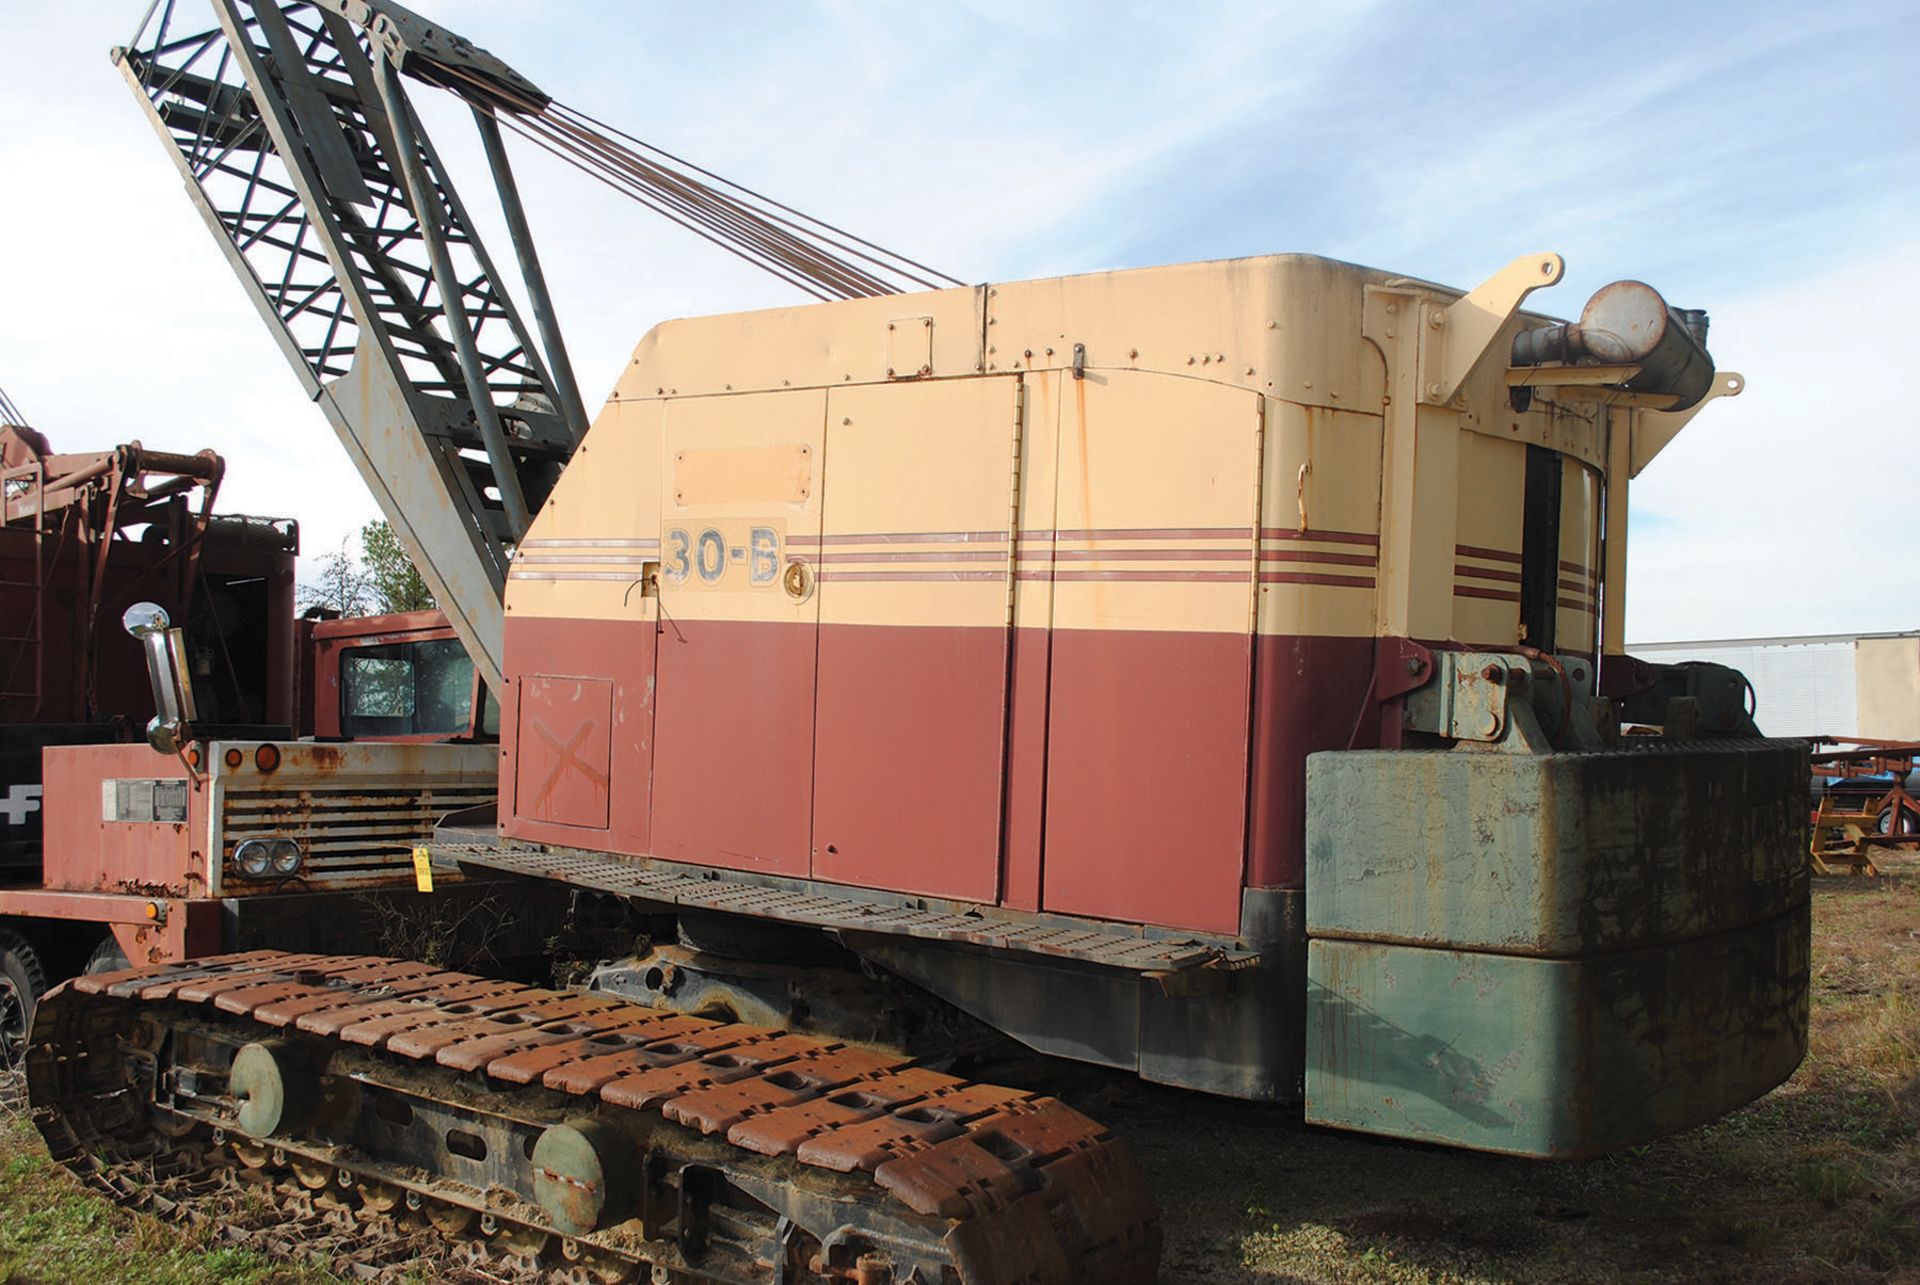 BUCYRUS ERIE 50-TON CRAWLER CRANE; MODEL 30-B, S/N 126940, WITH (5) SECTIONS OF LATTICE BOOM